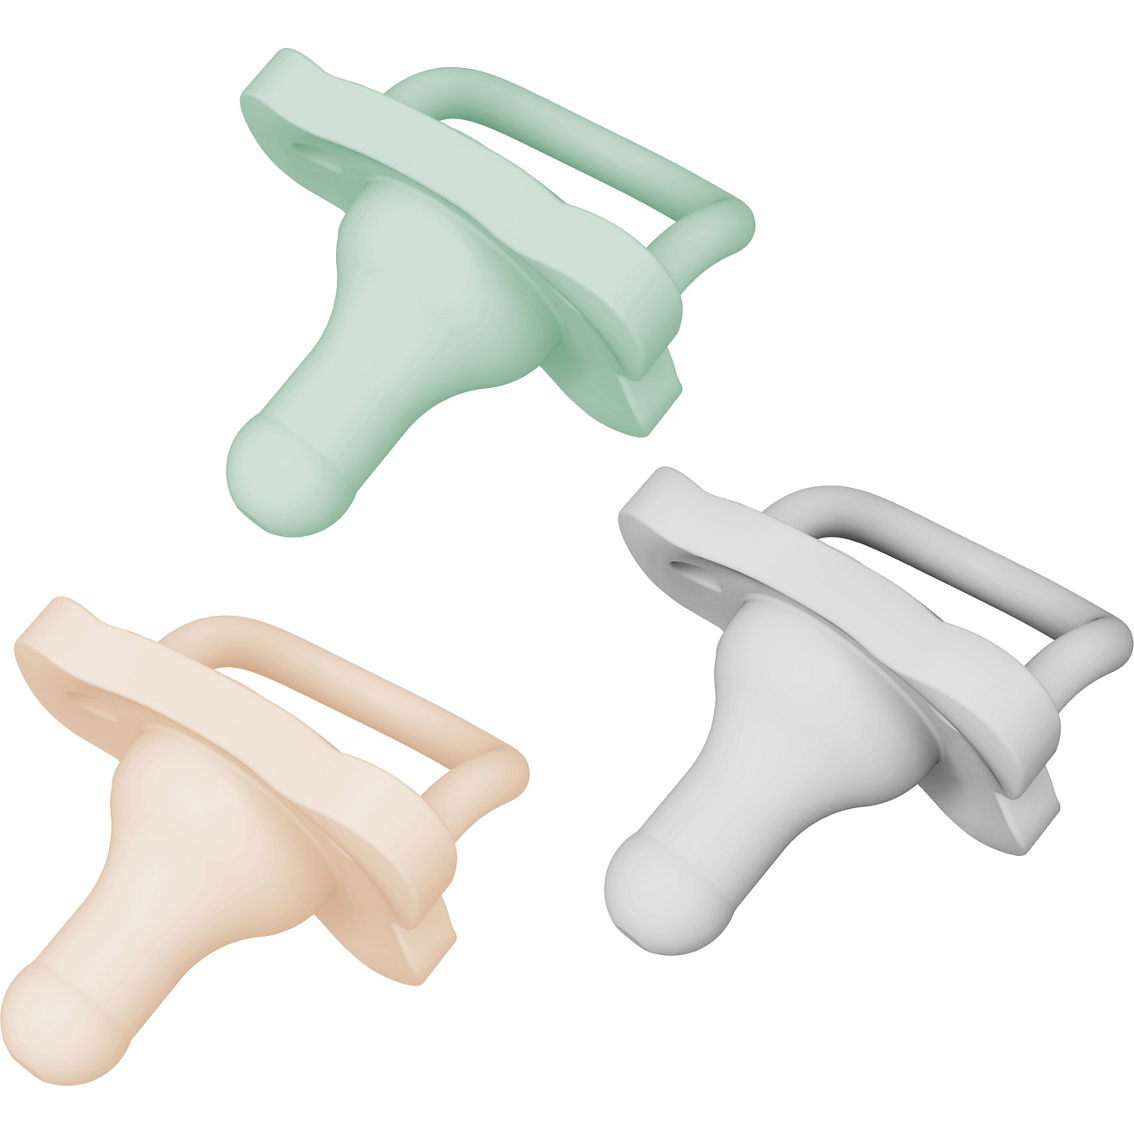 Dr. Brown's Silicone Pacifier 3 pk. - Image 2 of 3